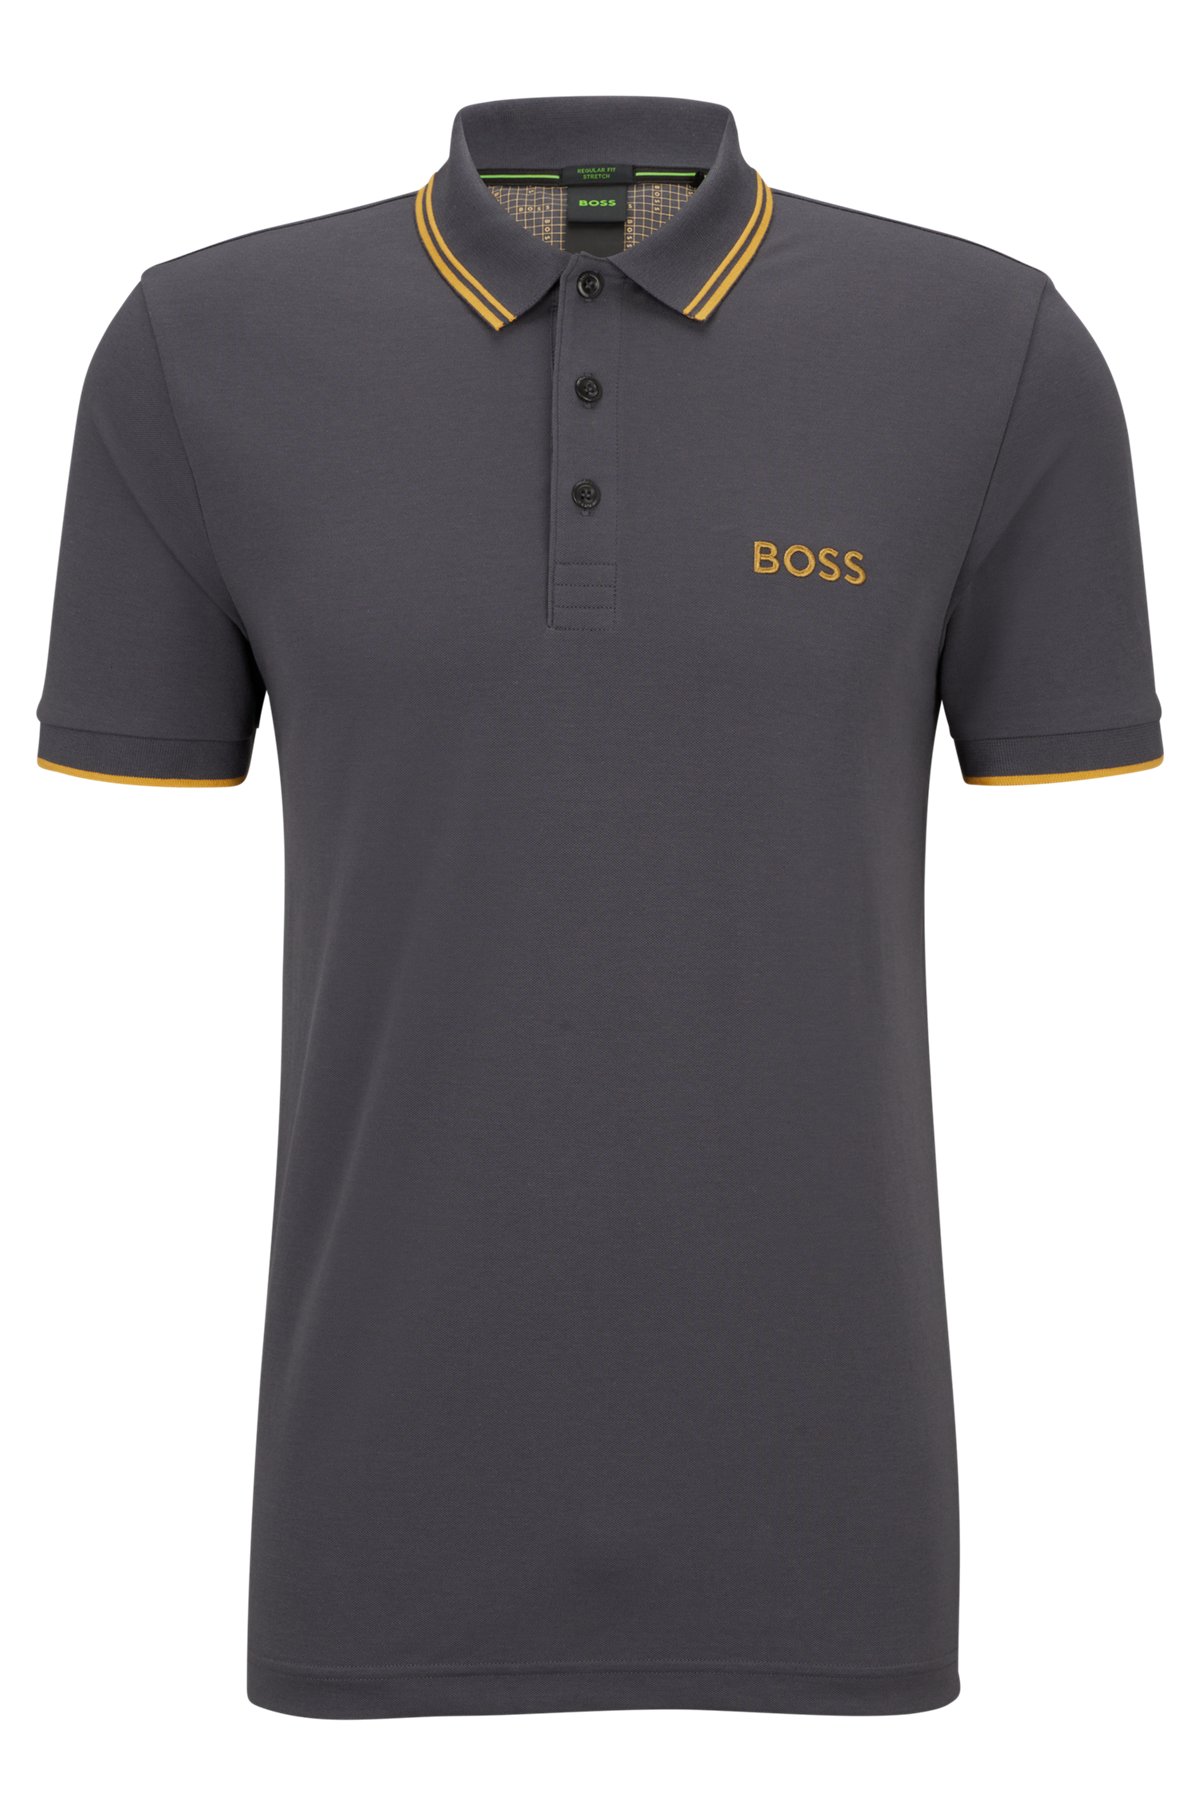 Cotton-blend polo shirt with contrast details, Dark Grey